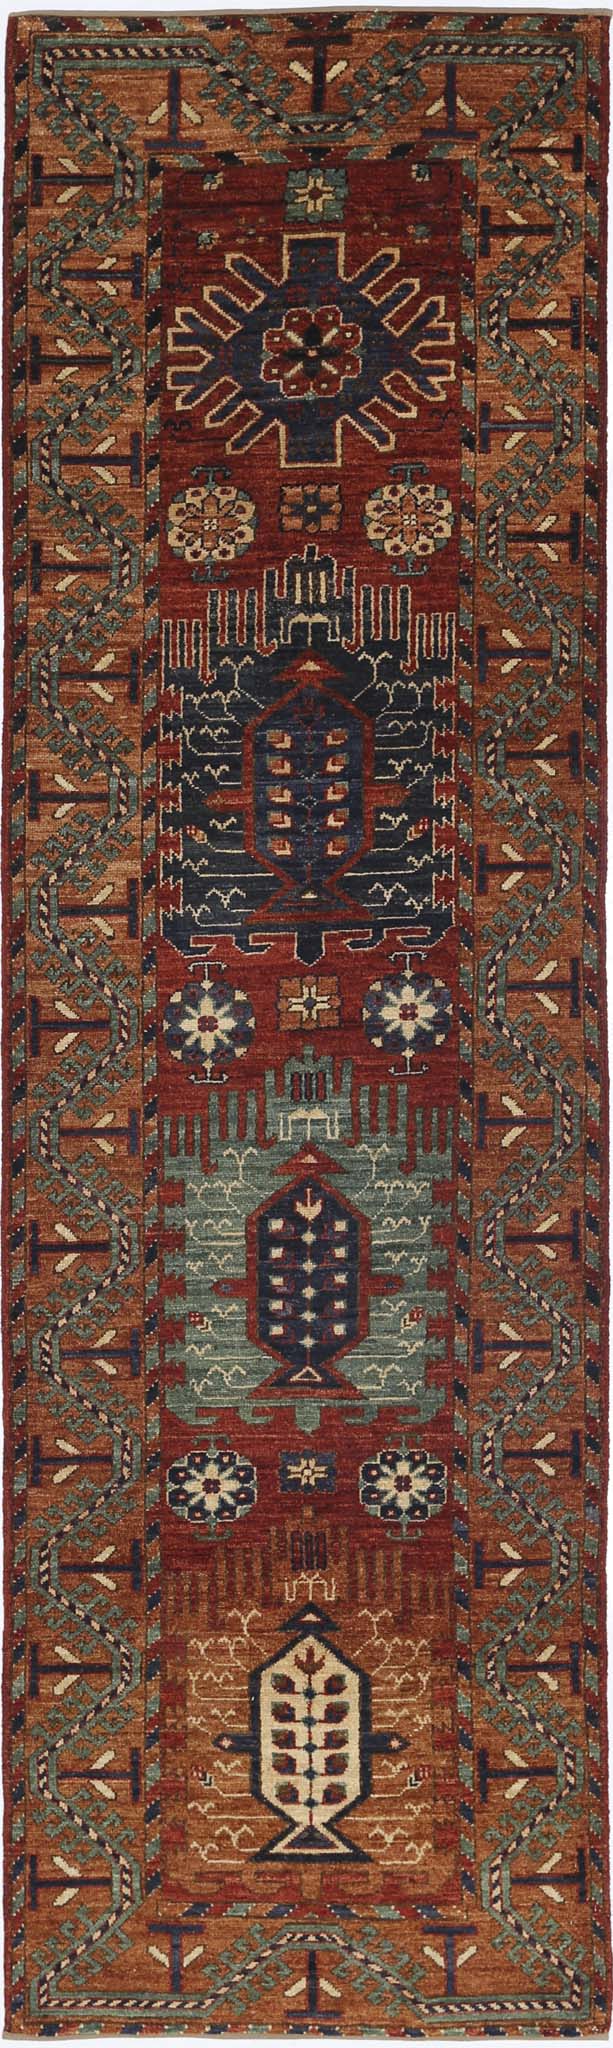 Tribal Hand Knotted Humna Humna Wool Rug of Size 2'9'' X 9'9'' in Red and Red Colors - Made in Afghanistan